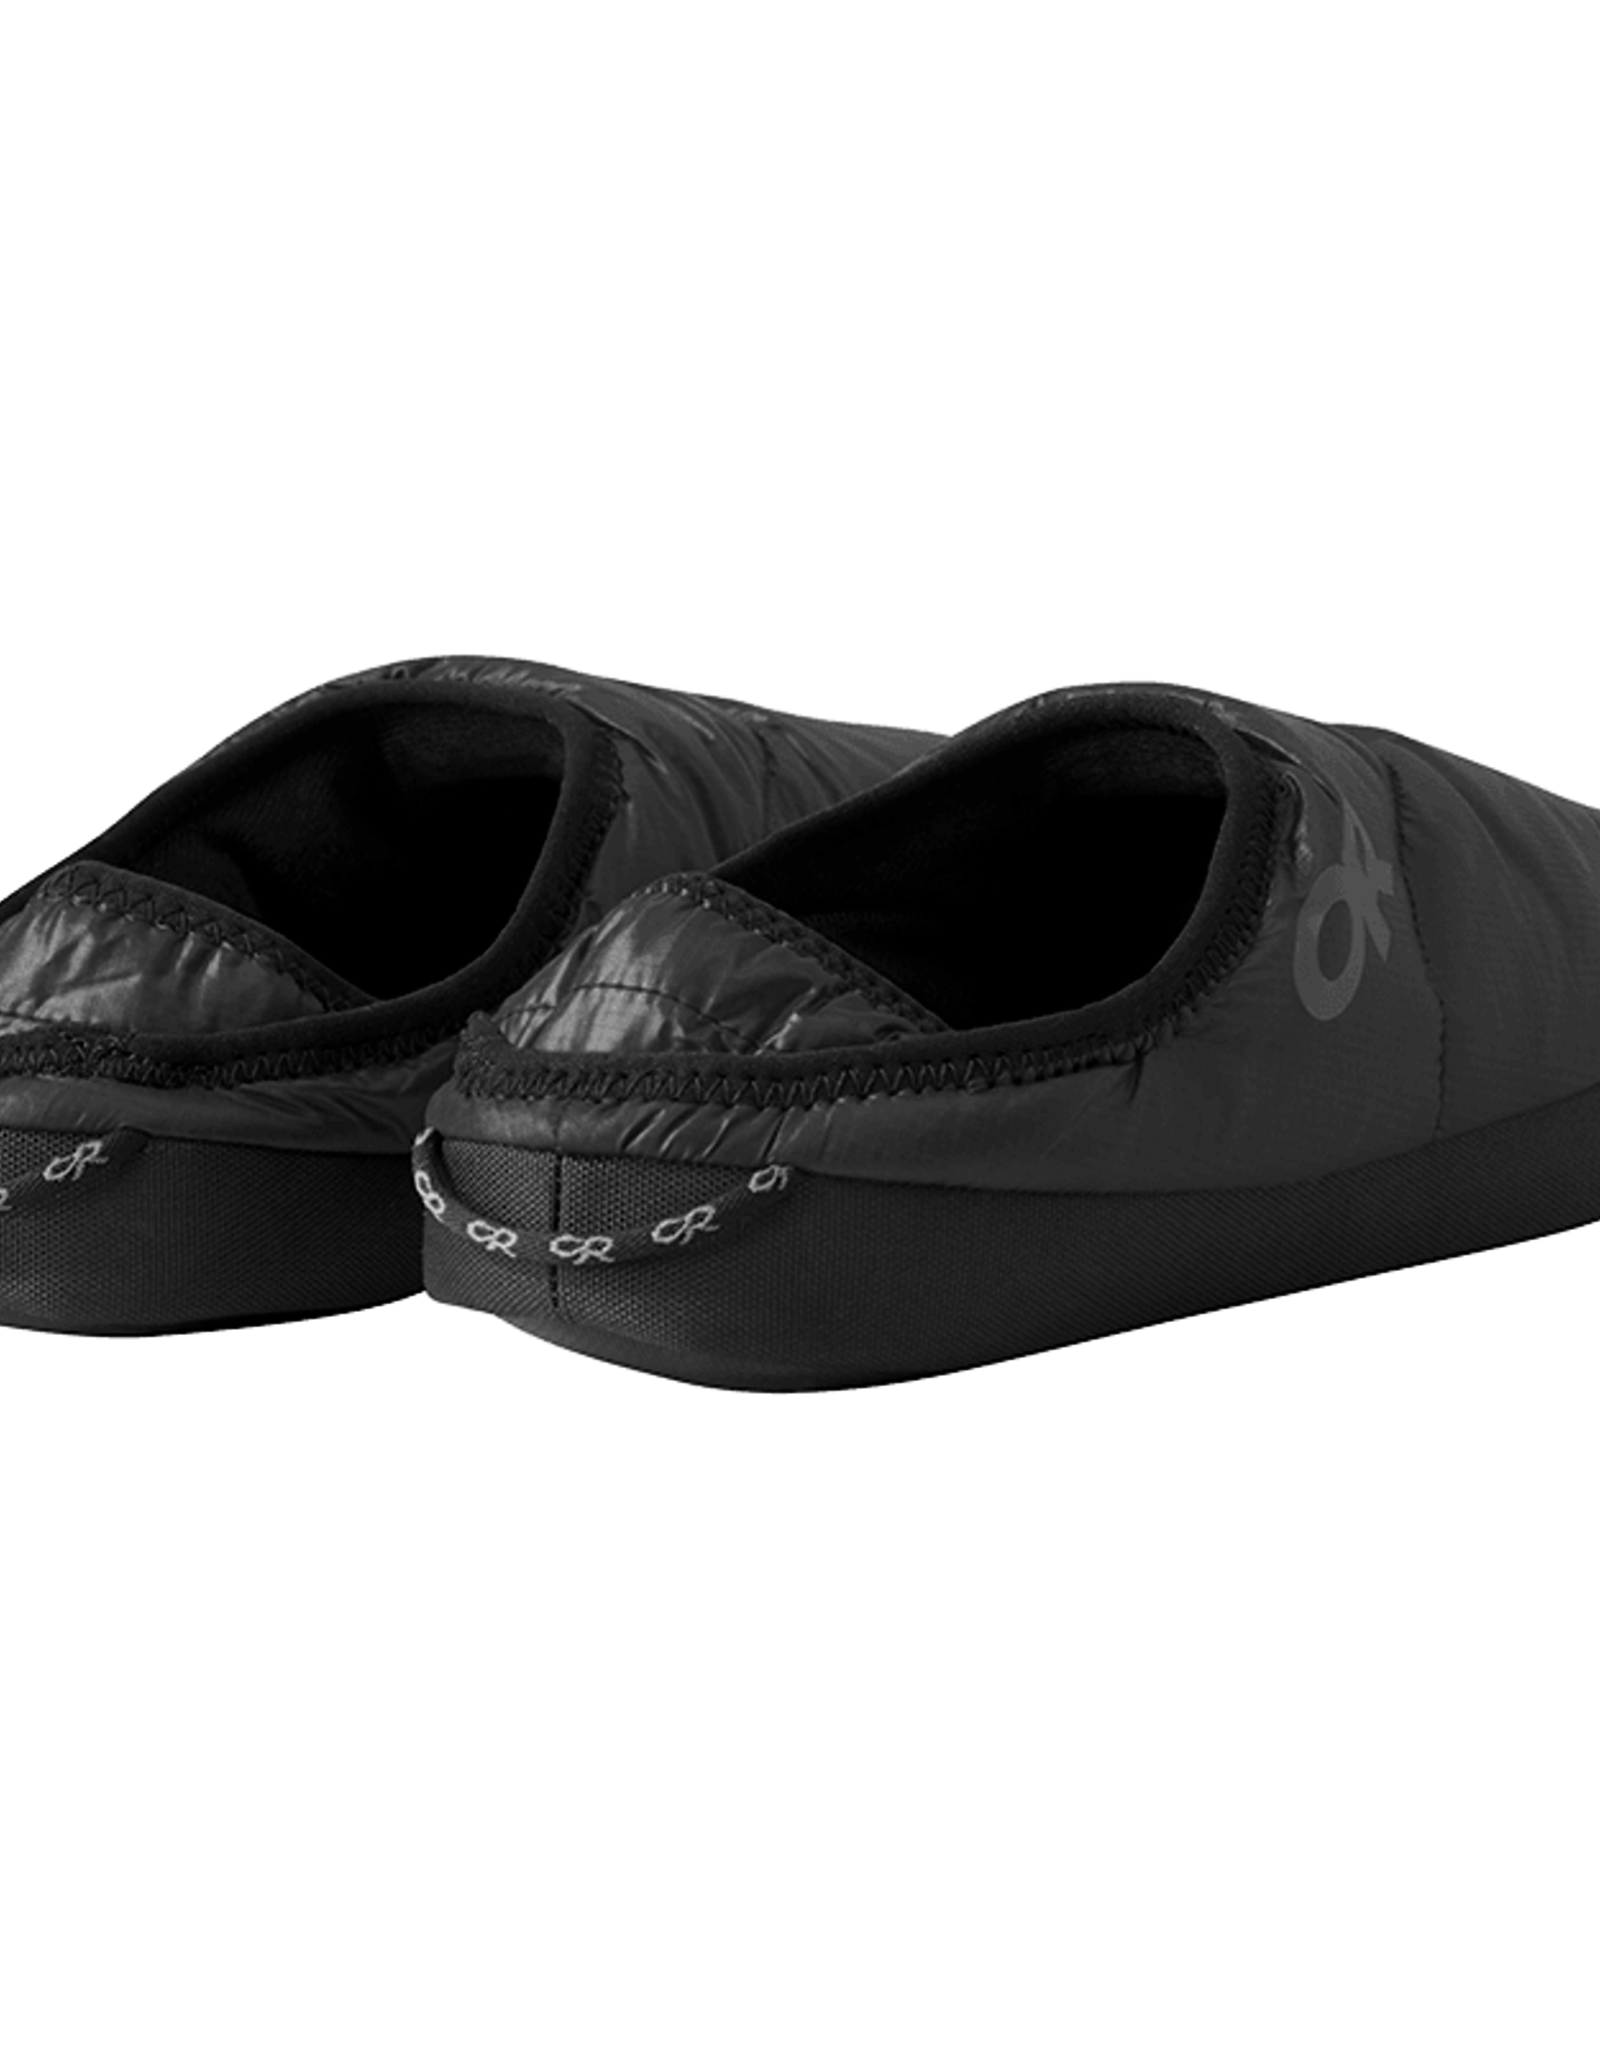 Outdoor Research Outdoor Research M's Tundra Slip-On Aerogel Booties